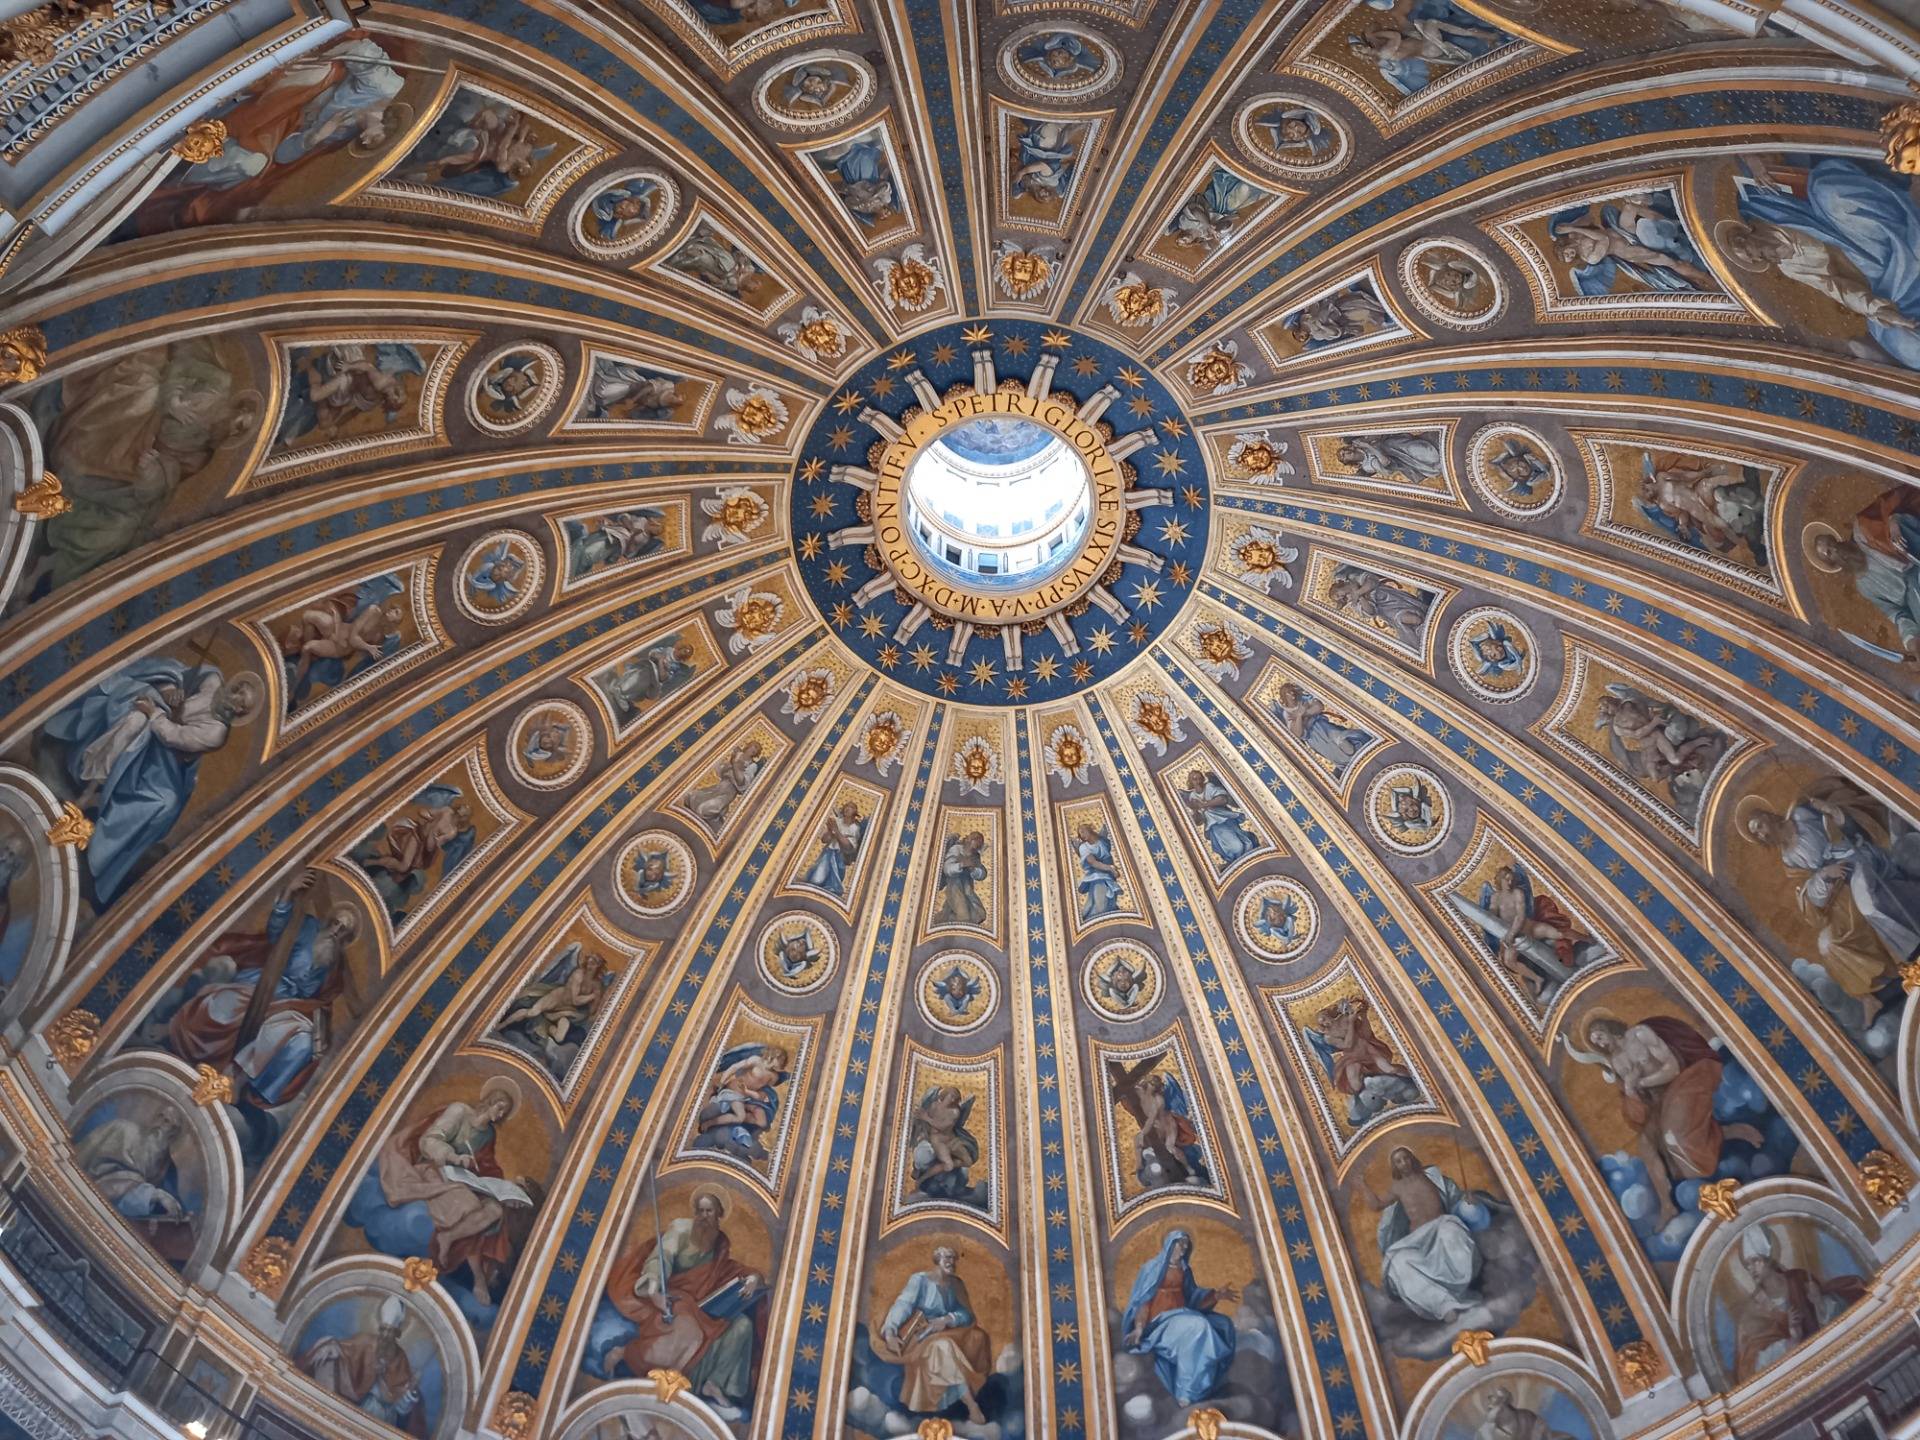 My trip to Roma part. 3 - St Peter's Basilica dome